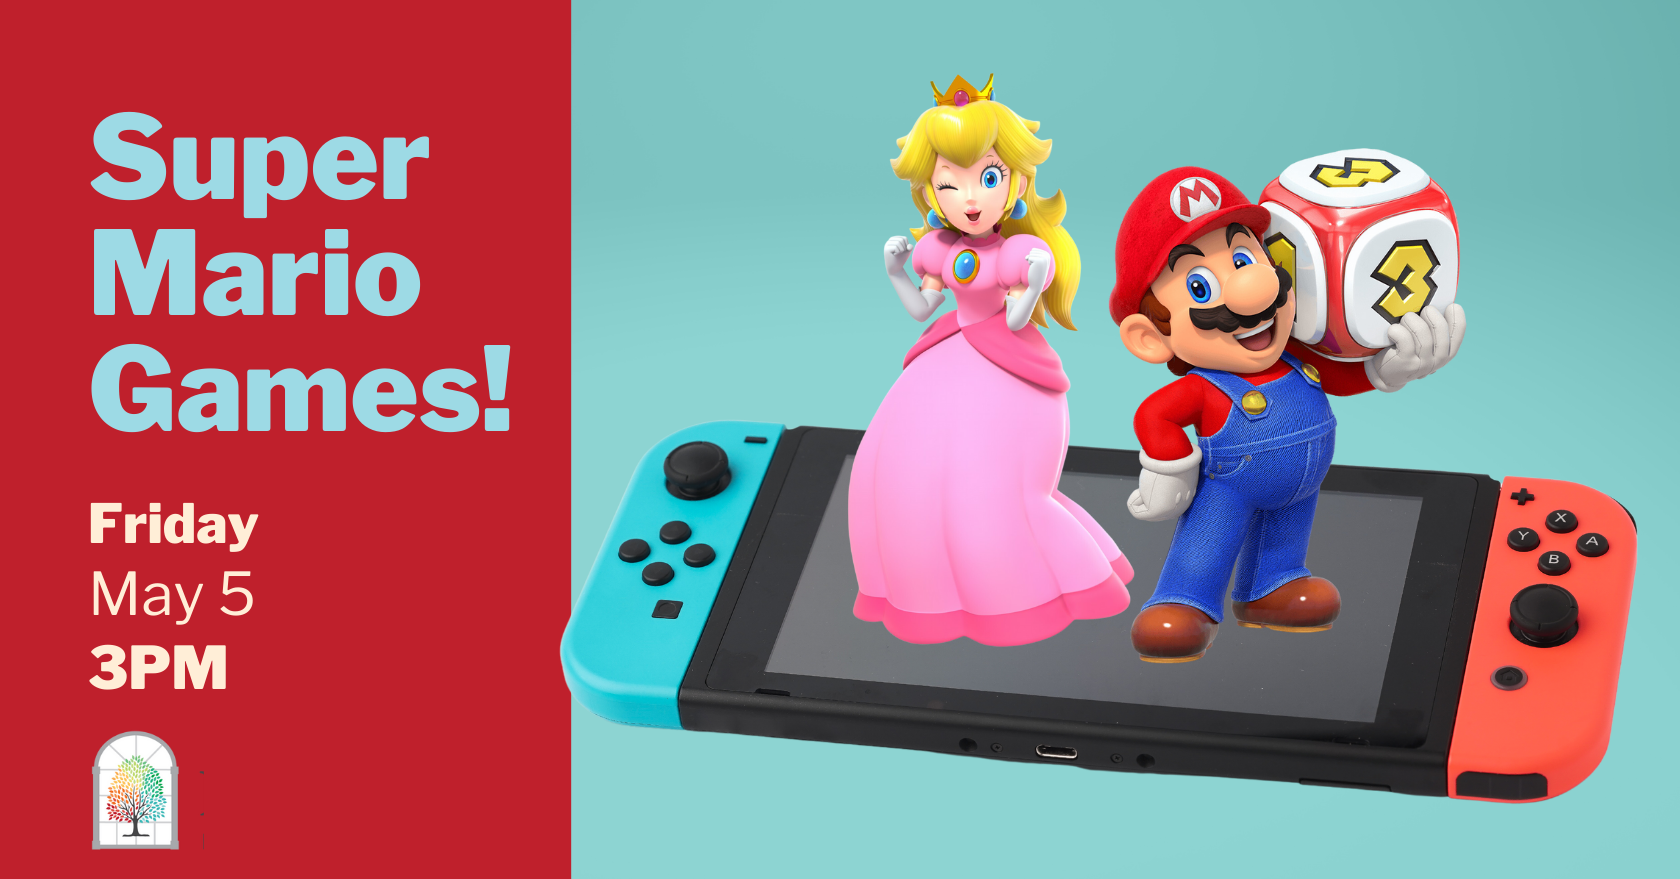 Super Mario Games! Friday, May 5 at 3PM image: Nintendo's Super Mario holding a dice block next to Princess Peach. They are both standing on a Nintendo Switch